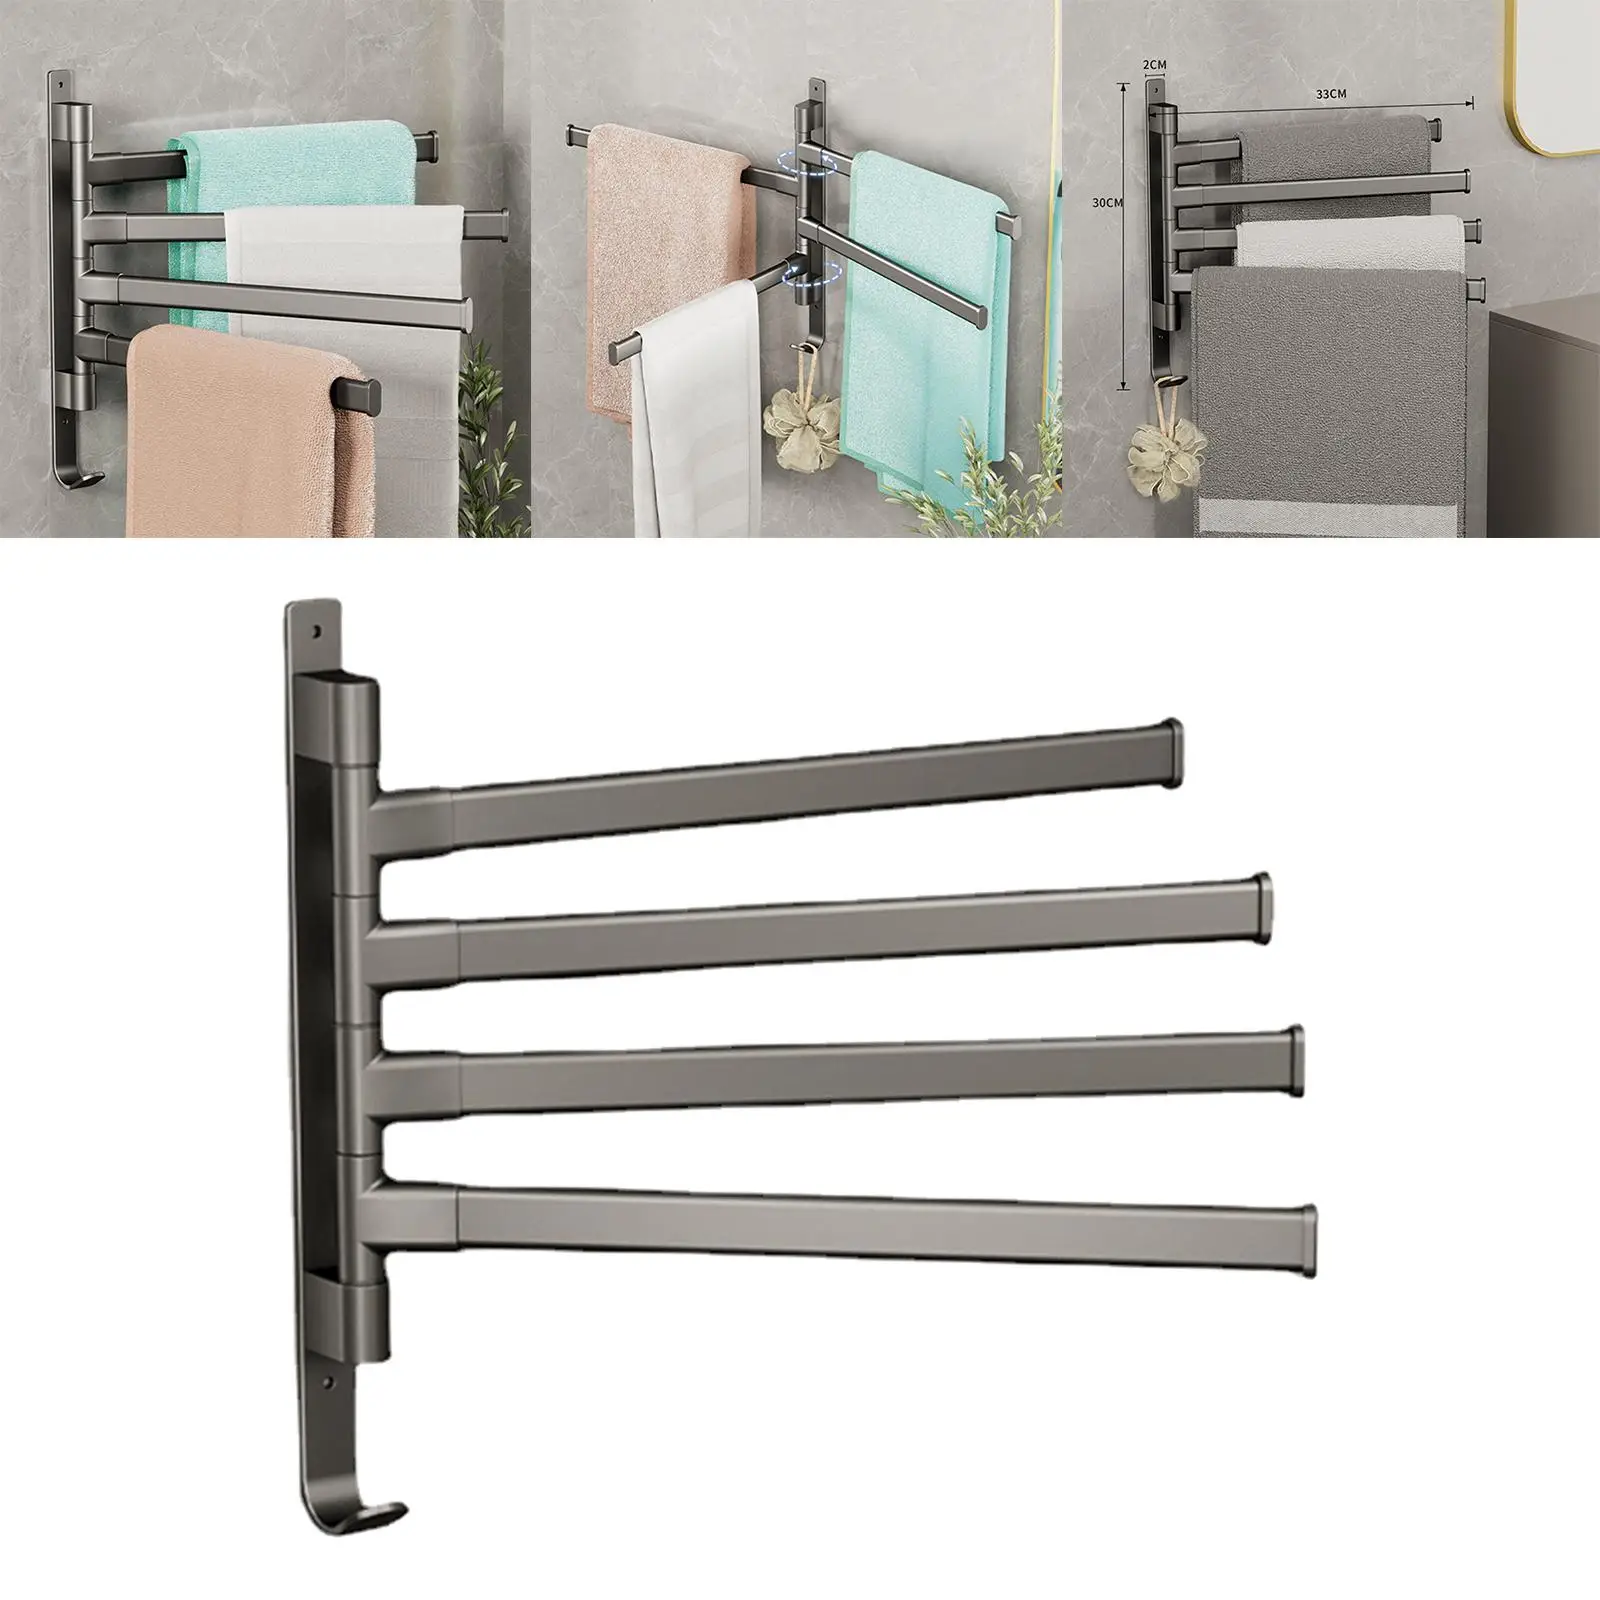 Swivel Towel Rack Organizer No Punching Towel Hanger for Pool Towel Rack Wall Mounted for Wall